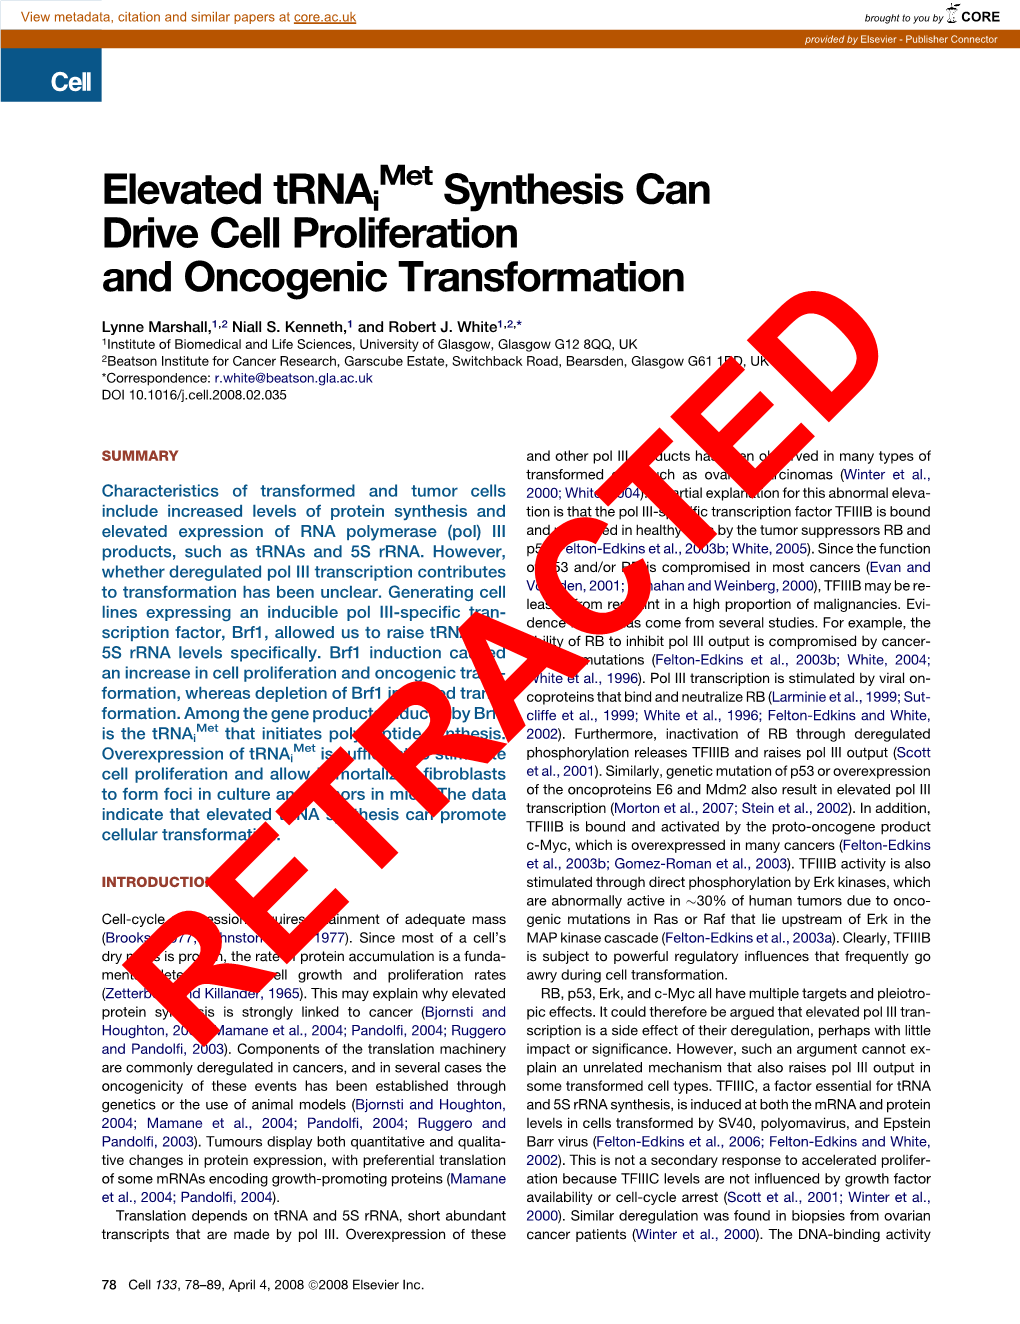 Elevated Trnai Synthesis Can Drive Cell Proliferation and Oncogenic Transformation